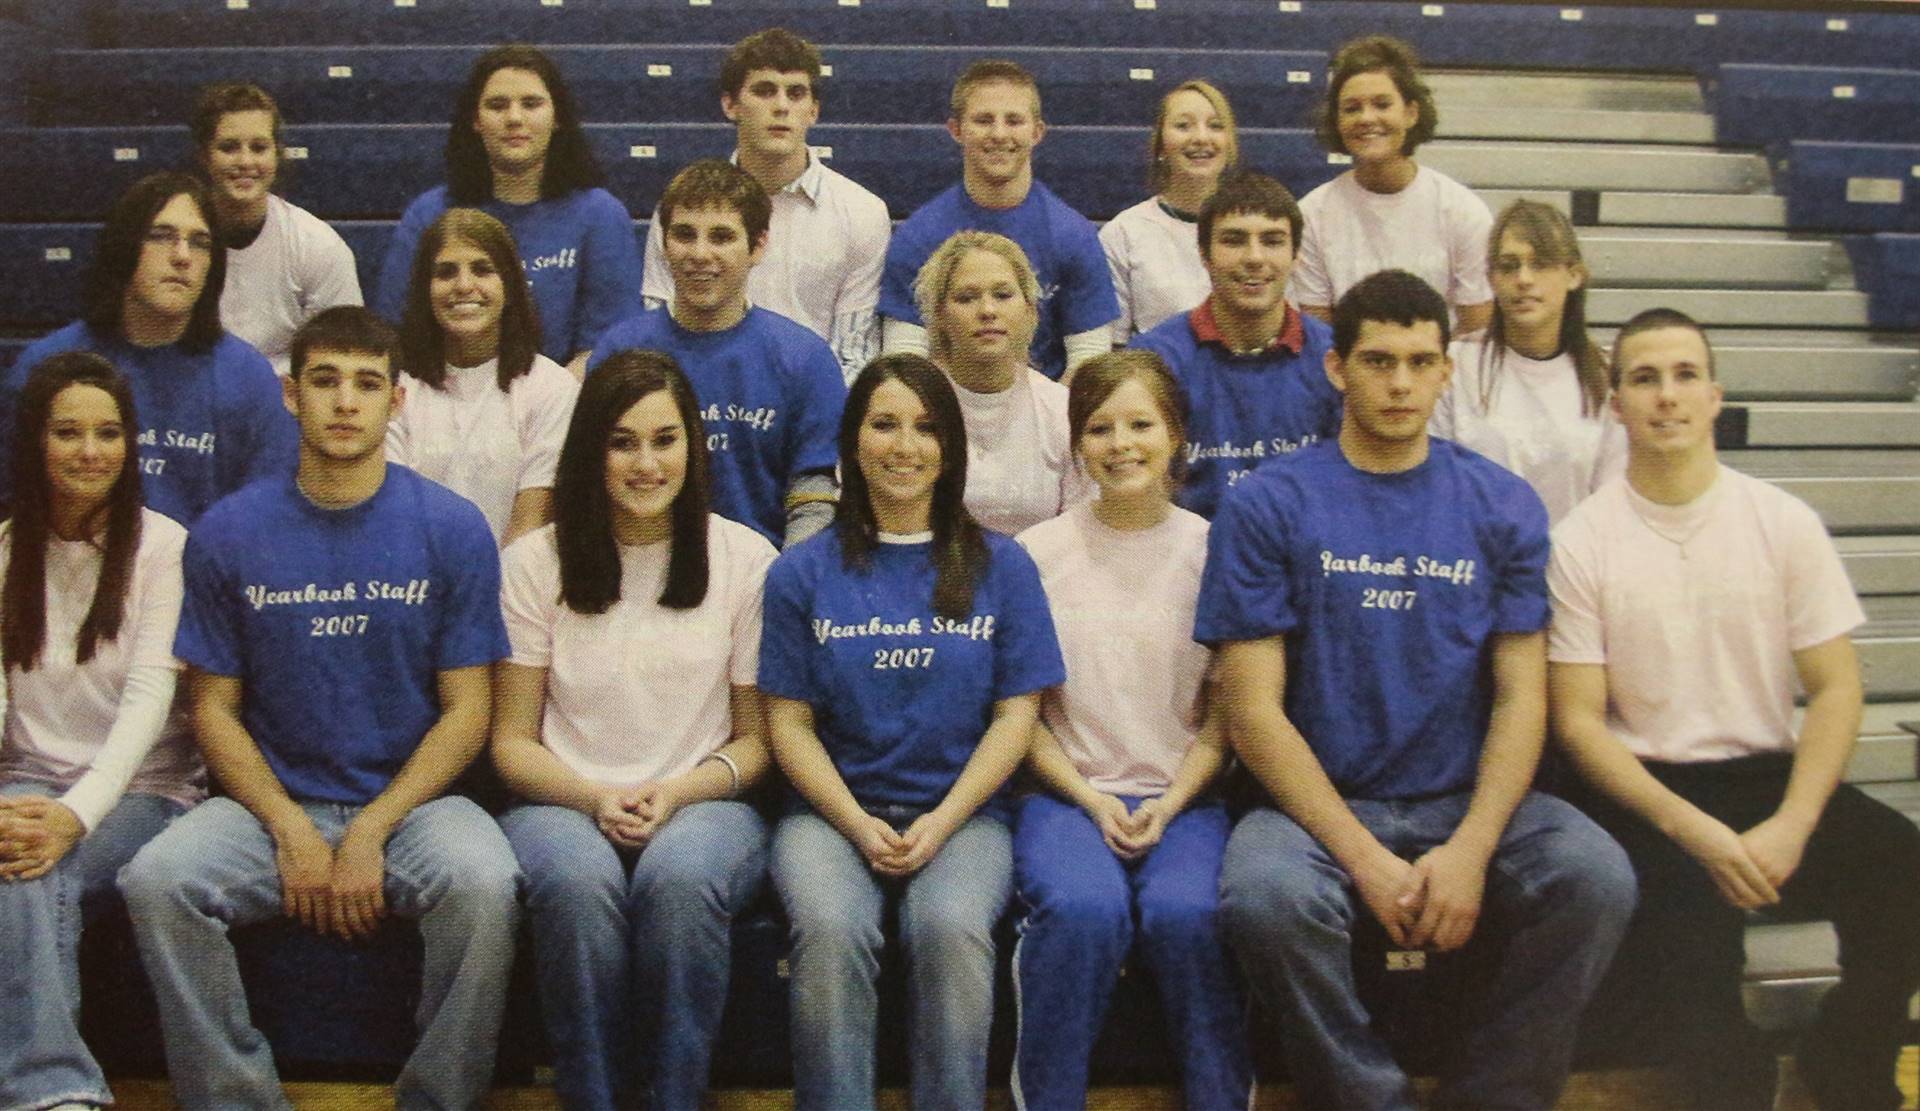 2007 Yearbook Staff